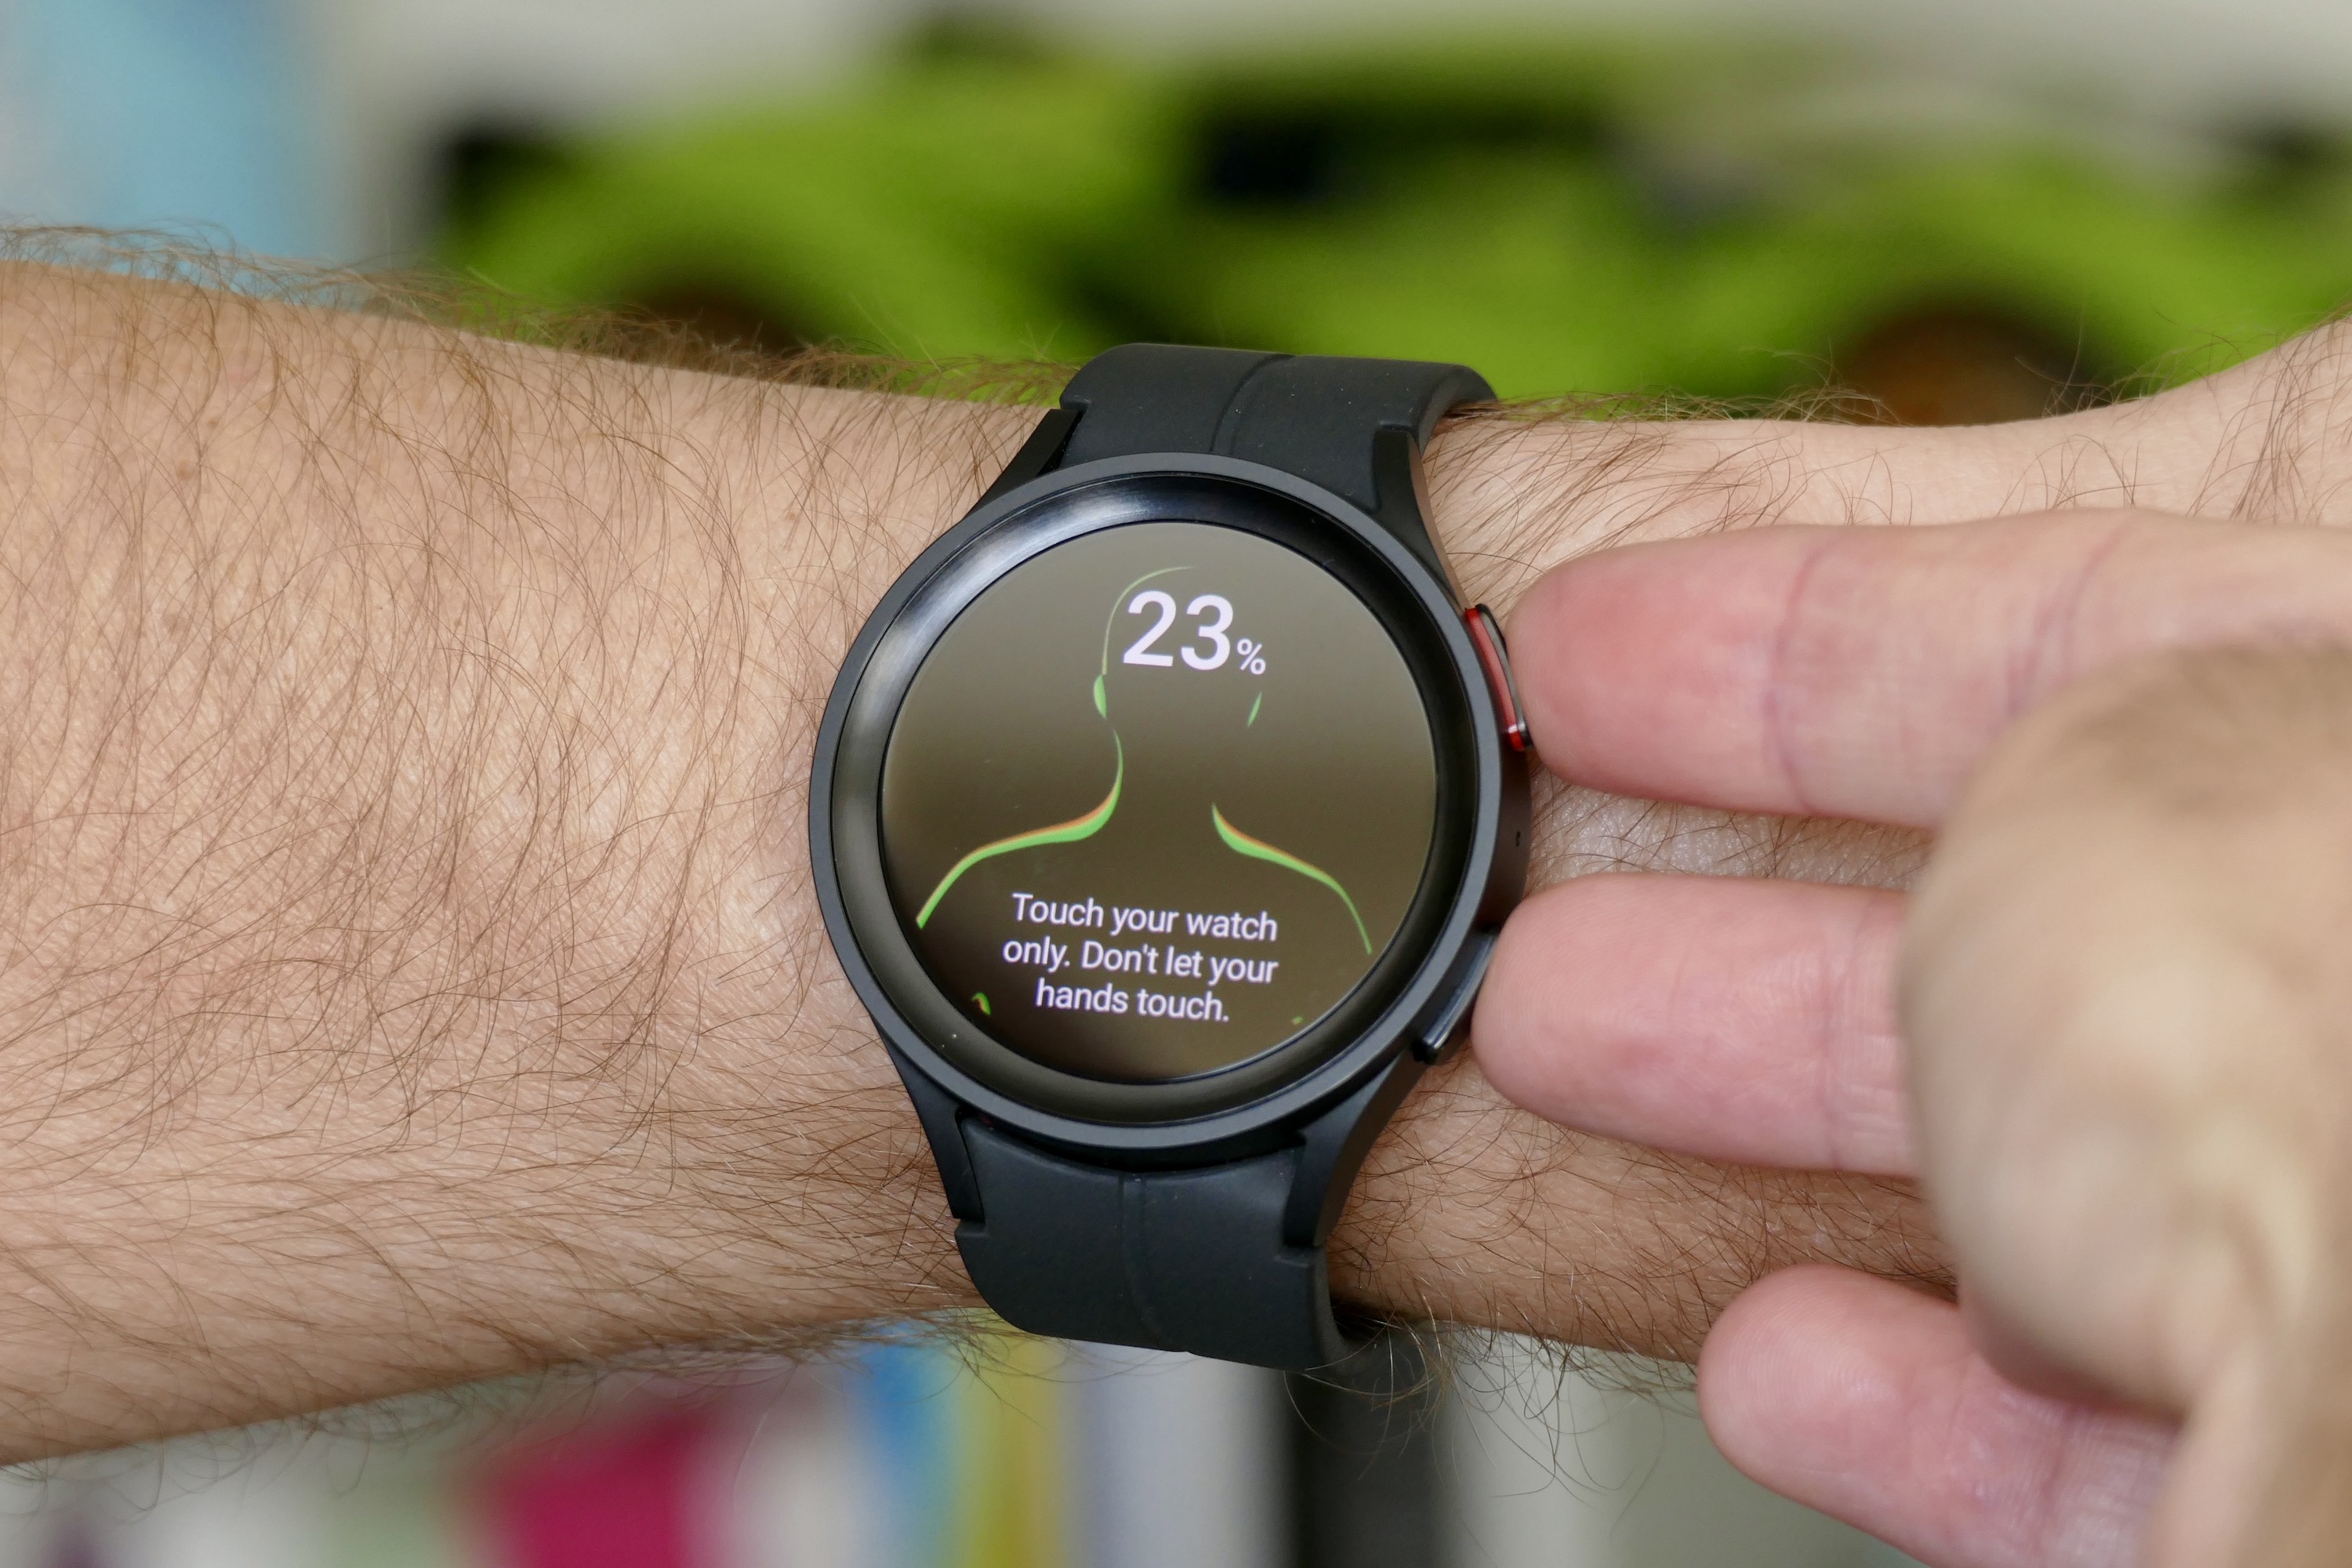 Pricey new Amazon Halo View health and fitness band adds display, BMI  tracking - PhoneArena